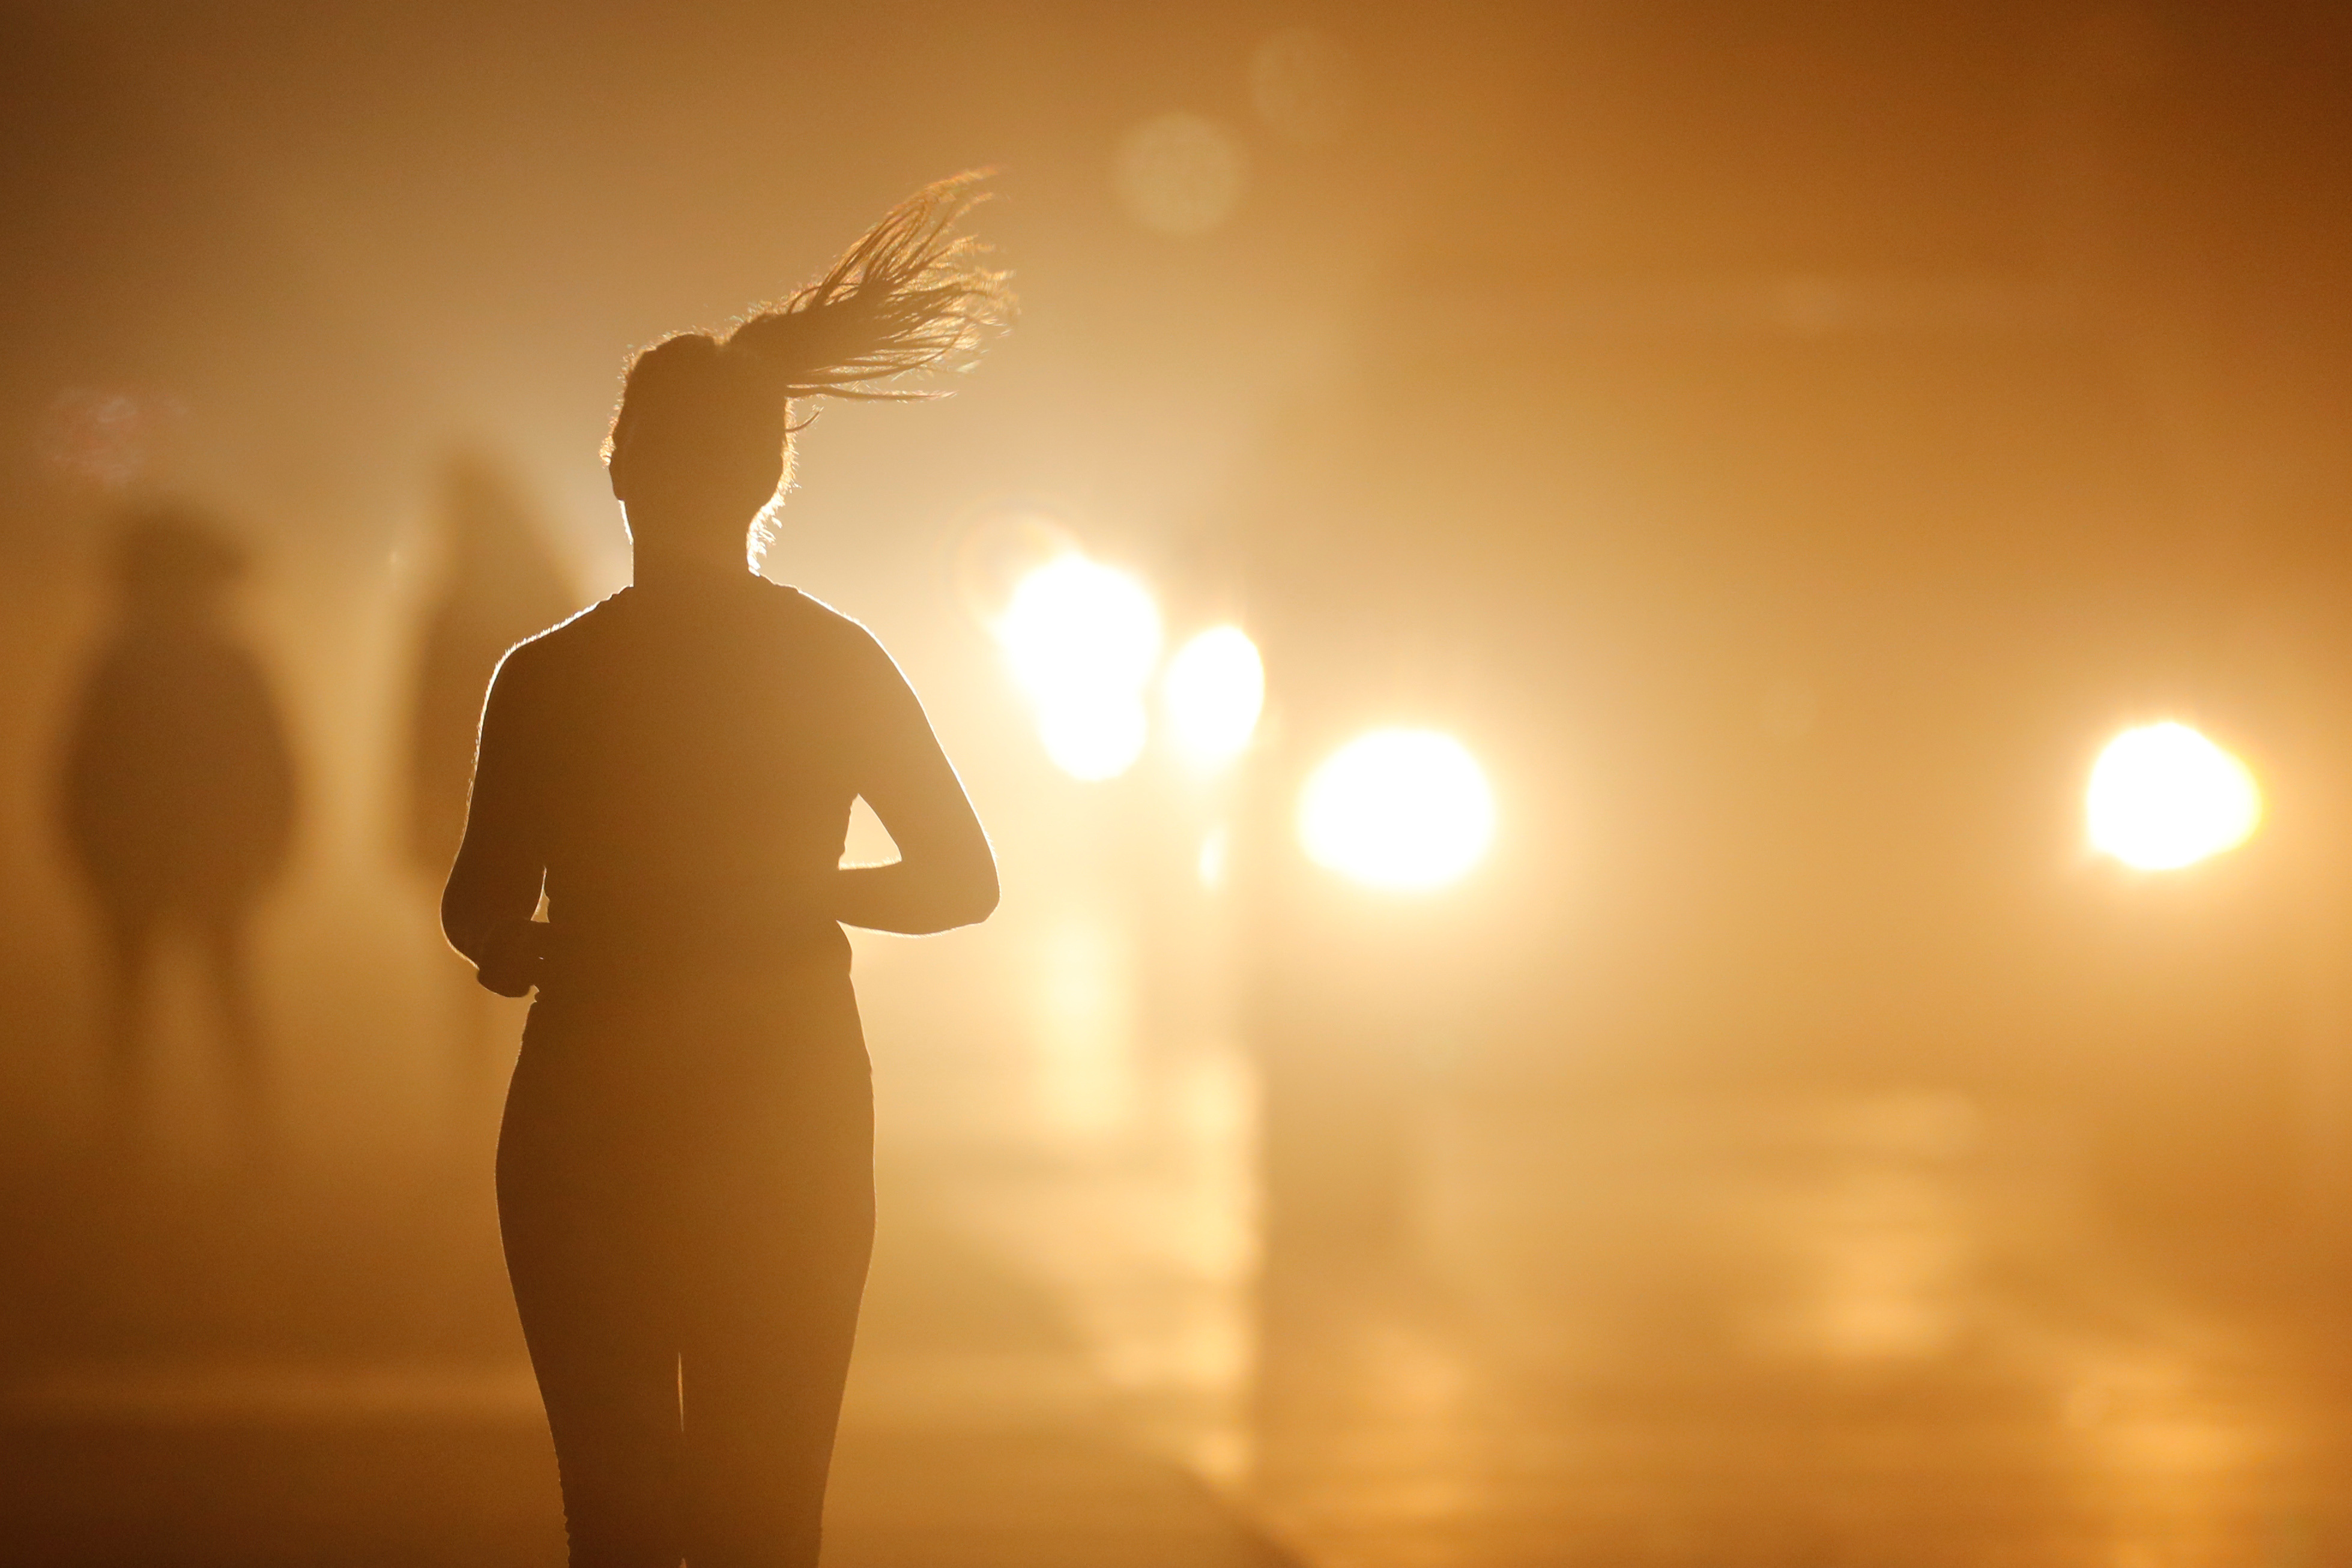 A women jogs along a roadside as temperatures cool off after sunset in Oceanside, California